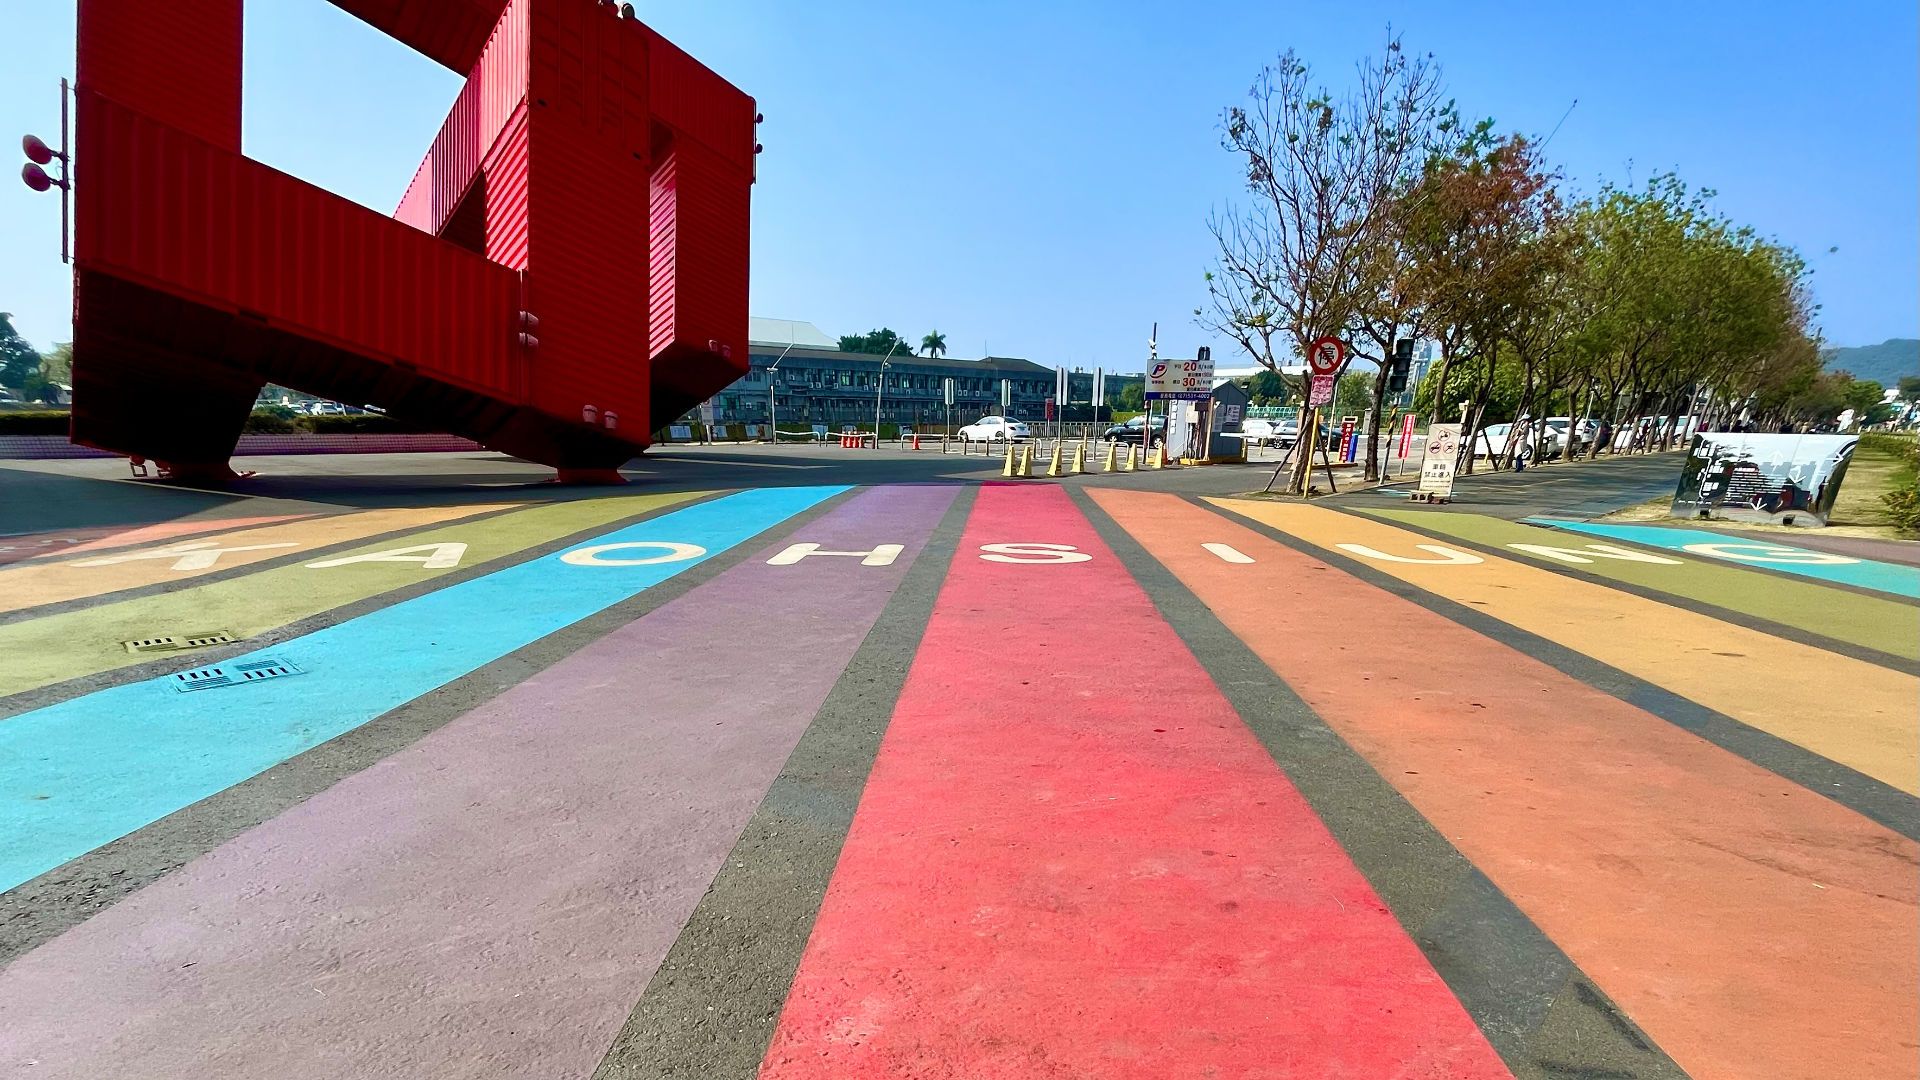 A rainbow crossing with the word ‘Kaohsiung’ written on it, and a large sculpture made of shipping containers in the background.